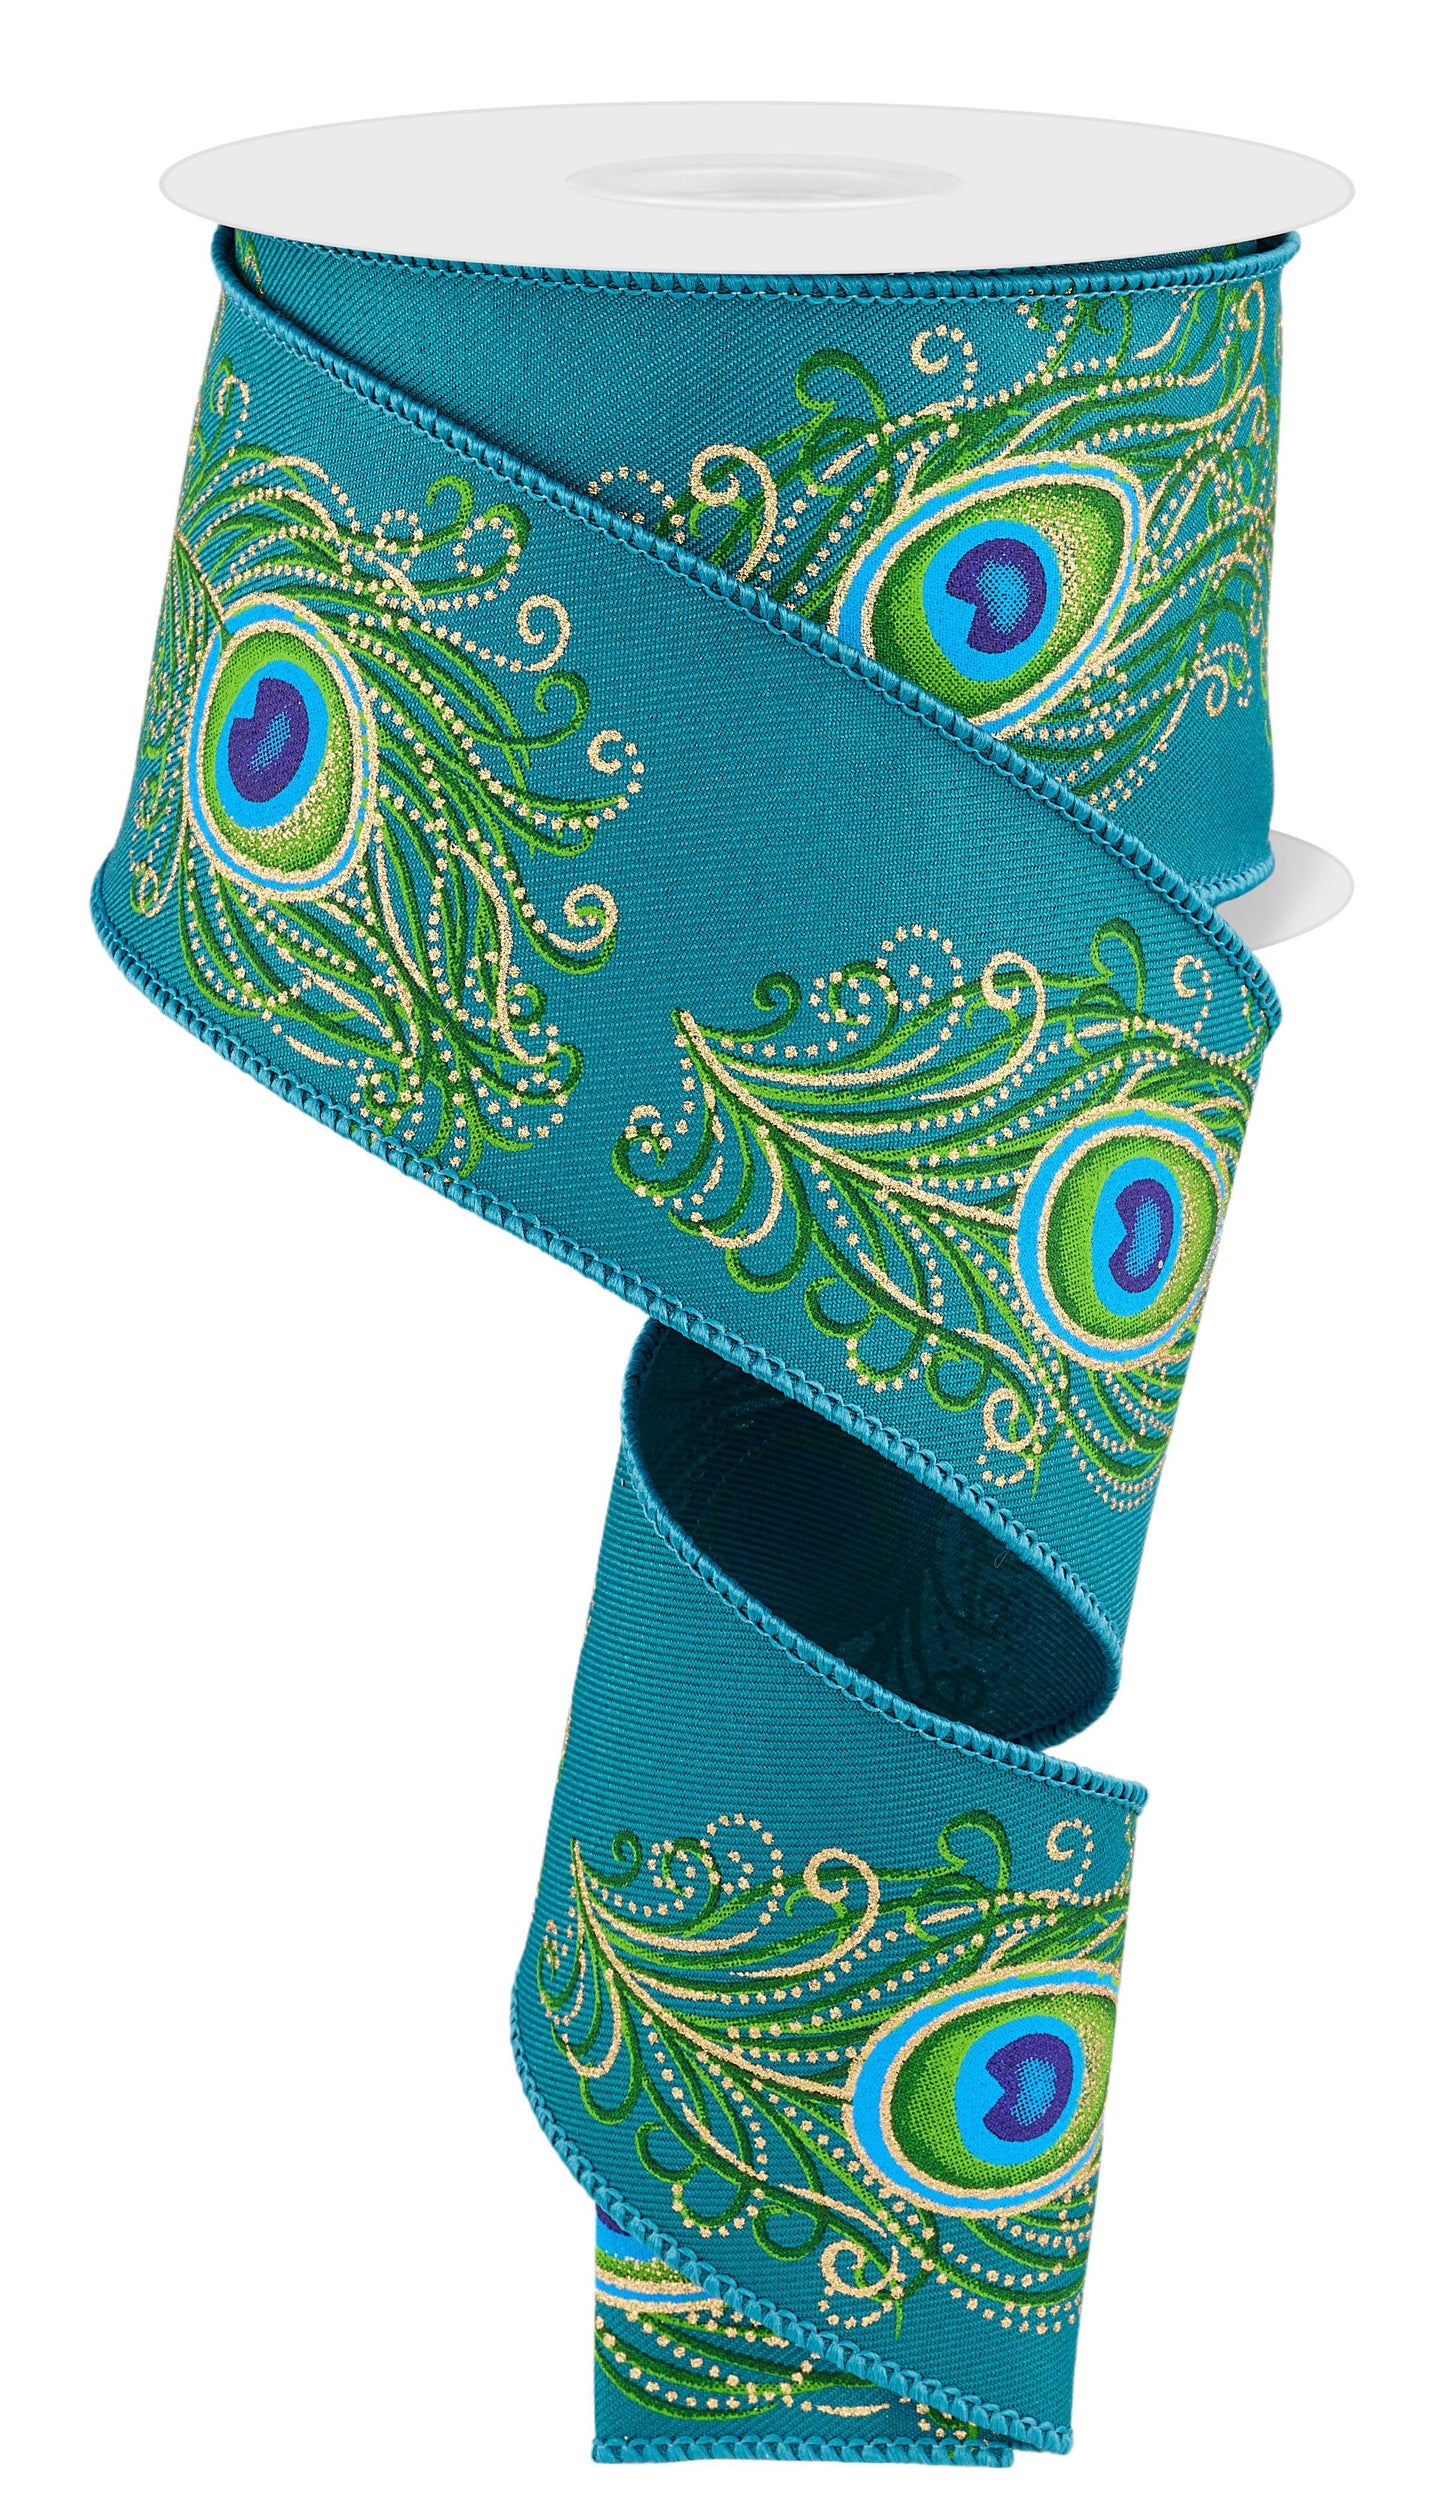 Wired Ribbon * Peacock Feathers * Teal, Green, Blue and Gold Canvas * 2.5" x 10 Yards * RGF108034